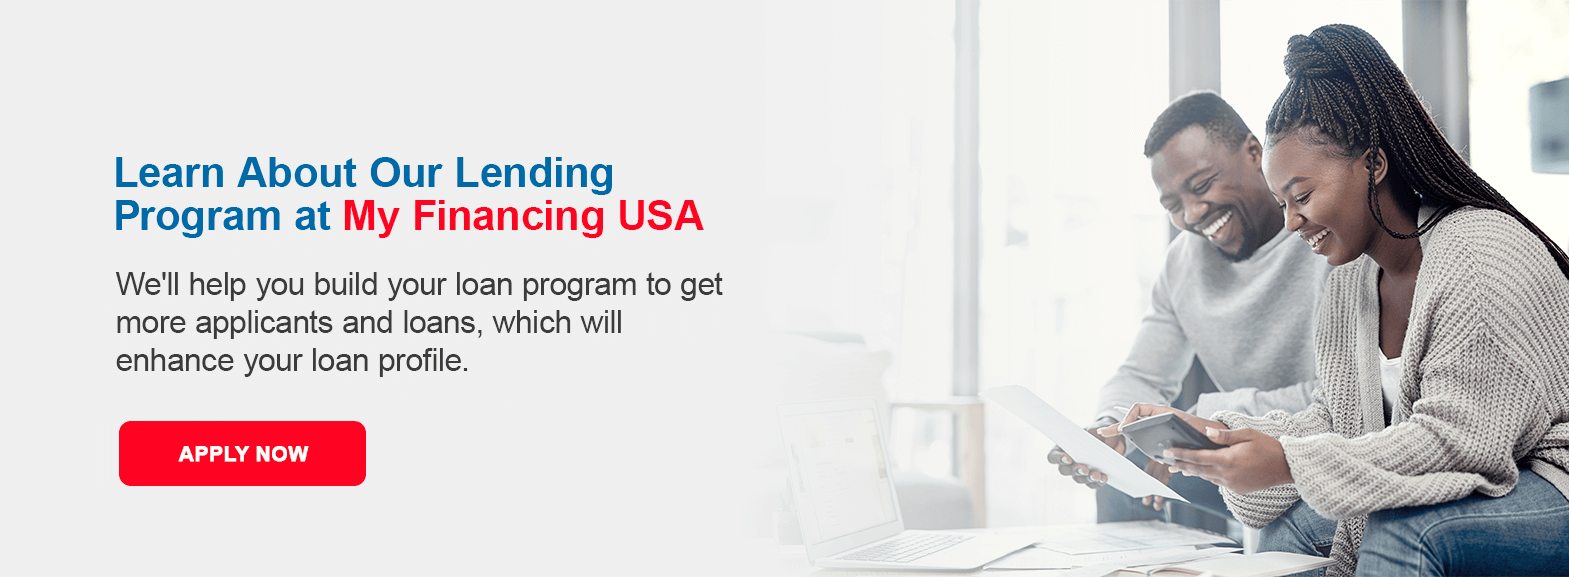 Learn About Our Lending Program at My Financing USA. Apply now!